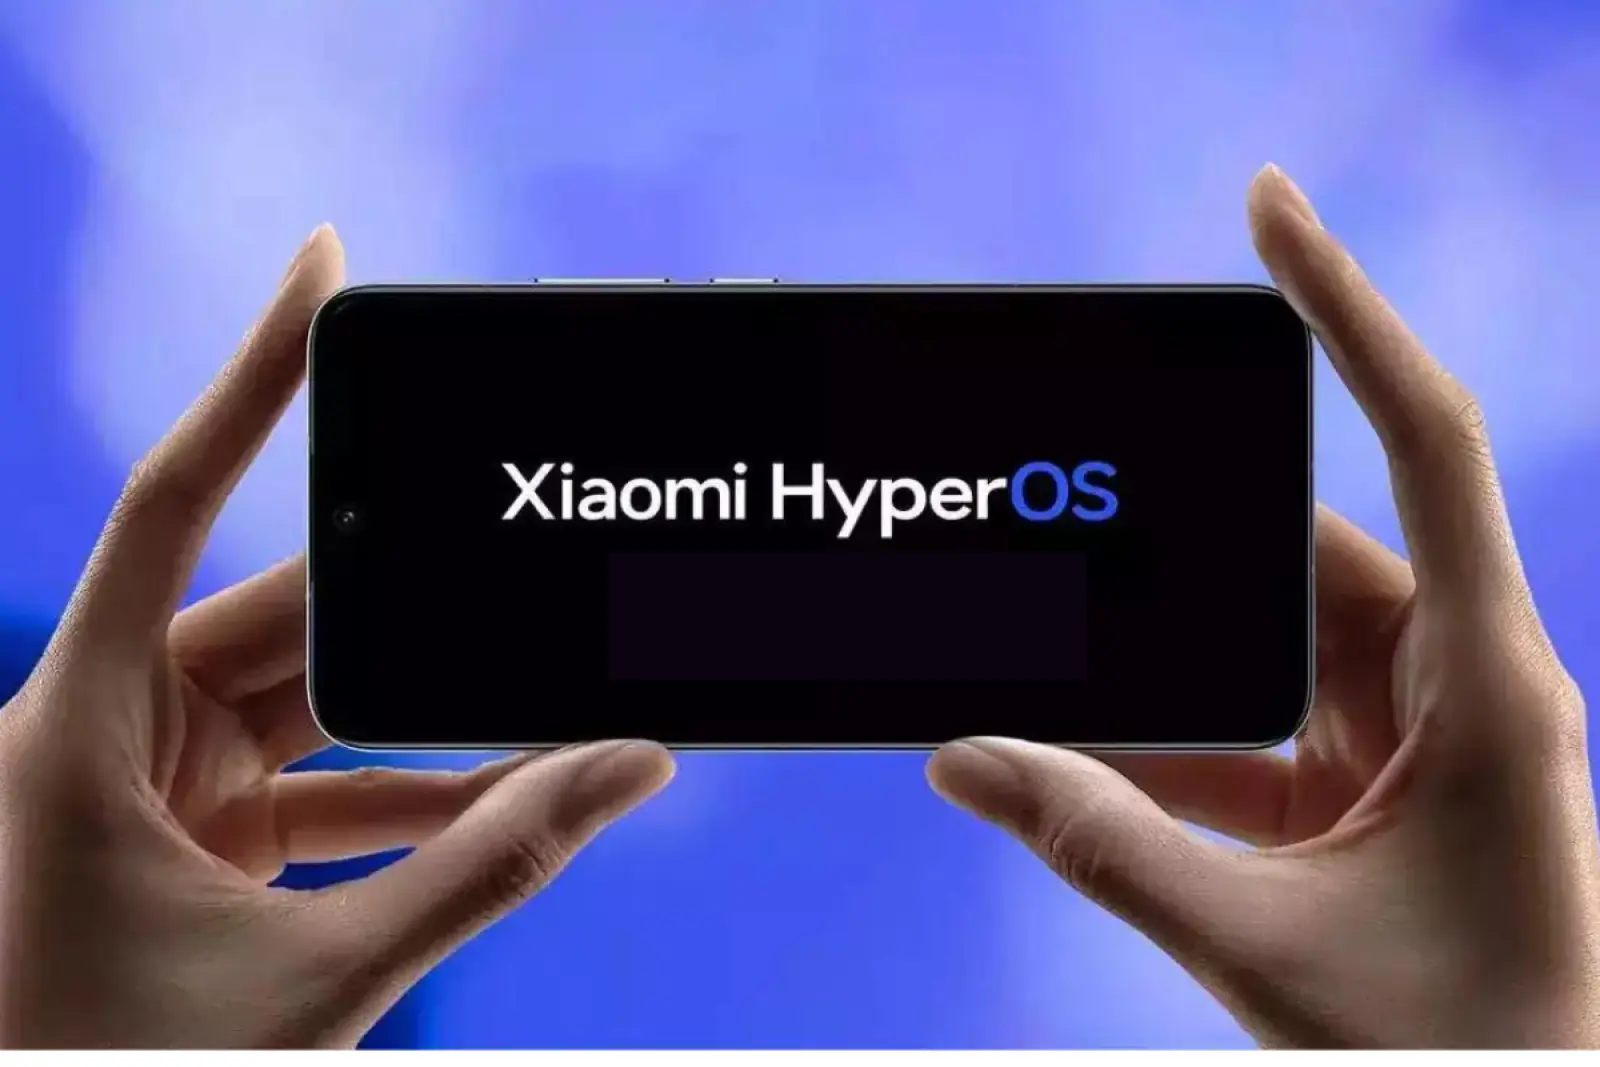 POCO X4 GT phone got HyperOS update, the style of using the phone will change with new features